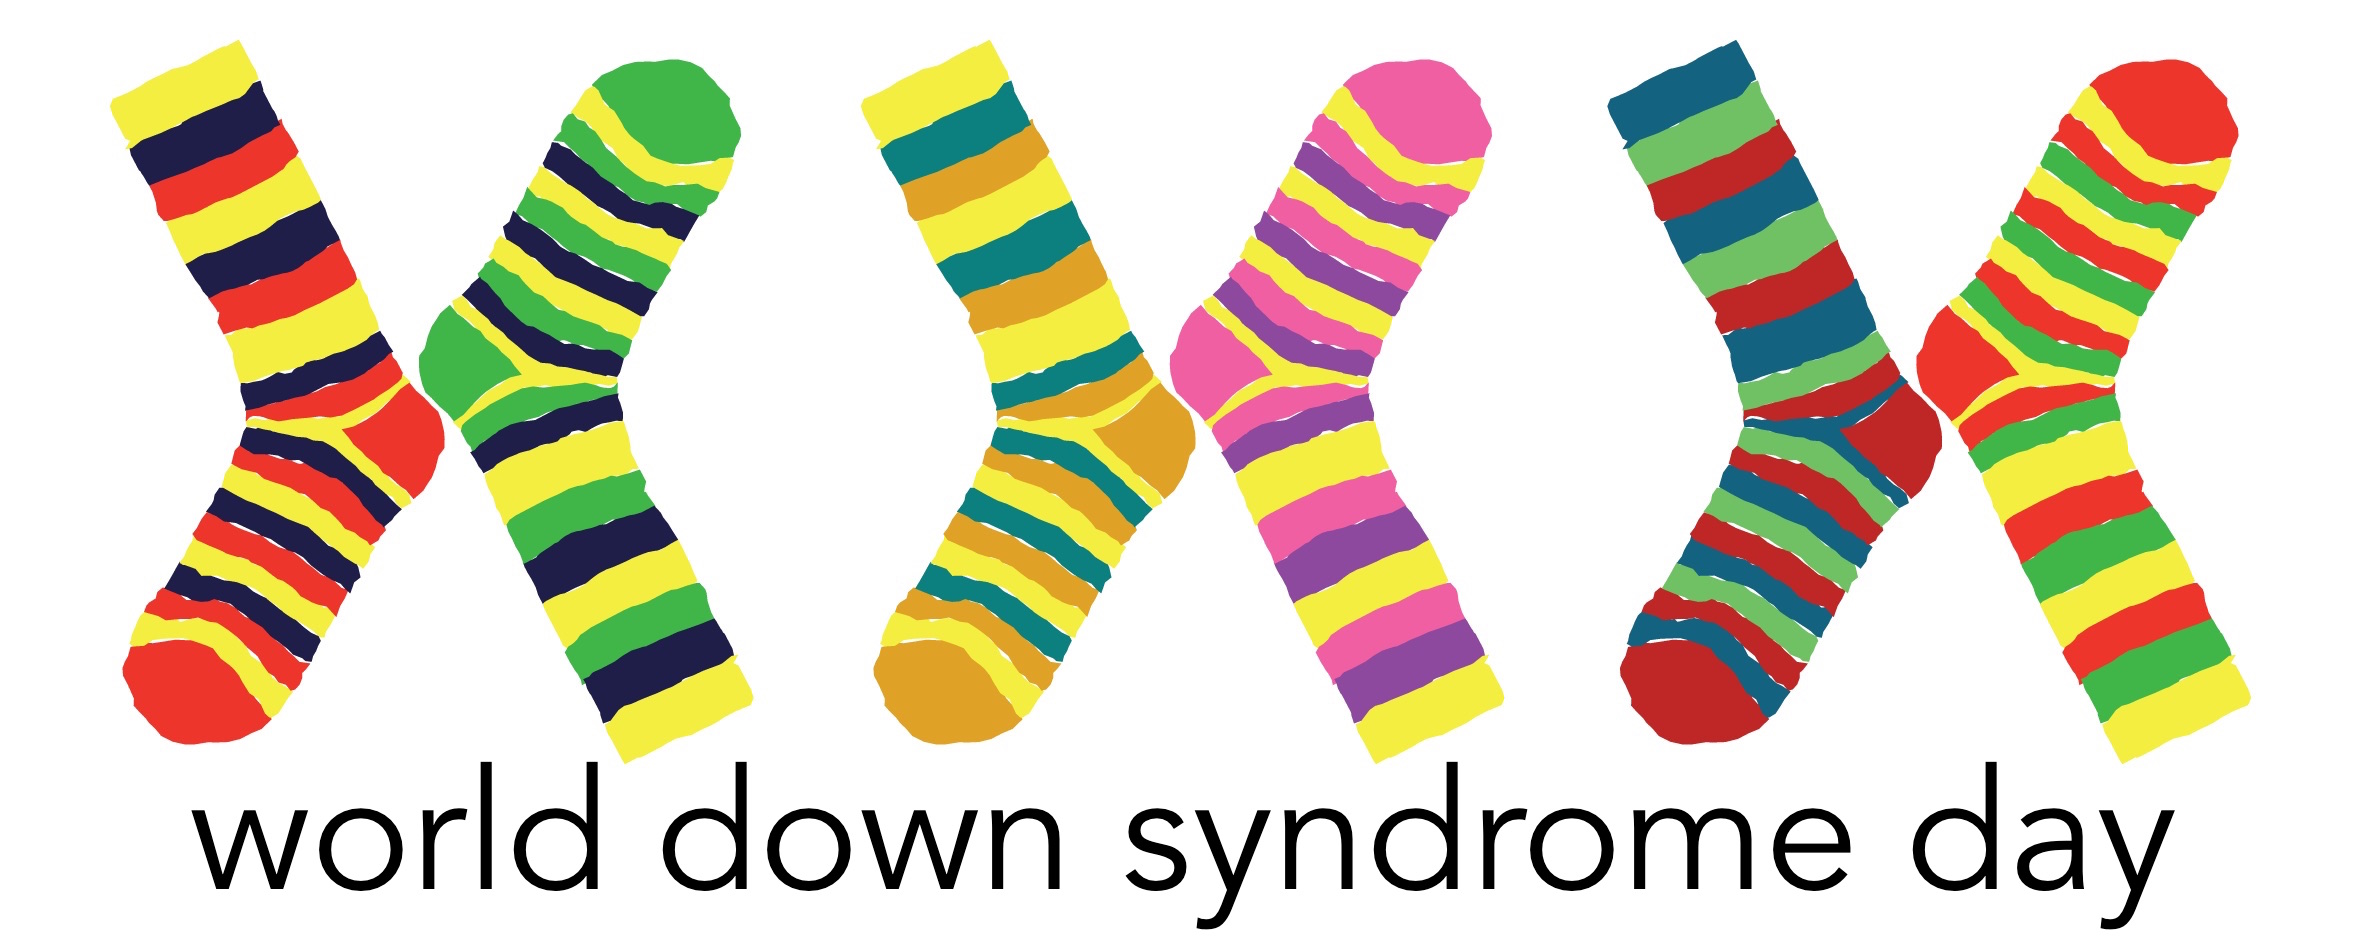 World Down Syndrome Day - March 21 - KindLink Global